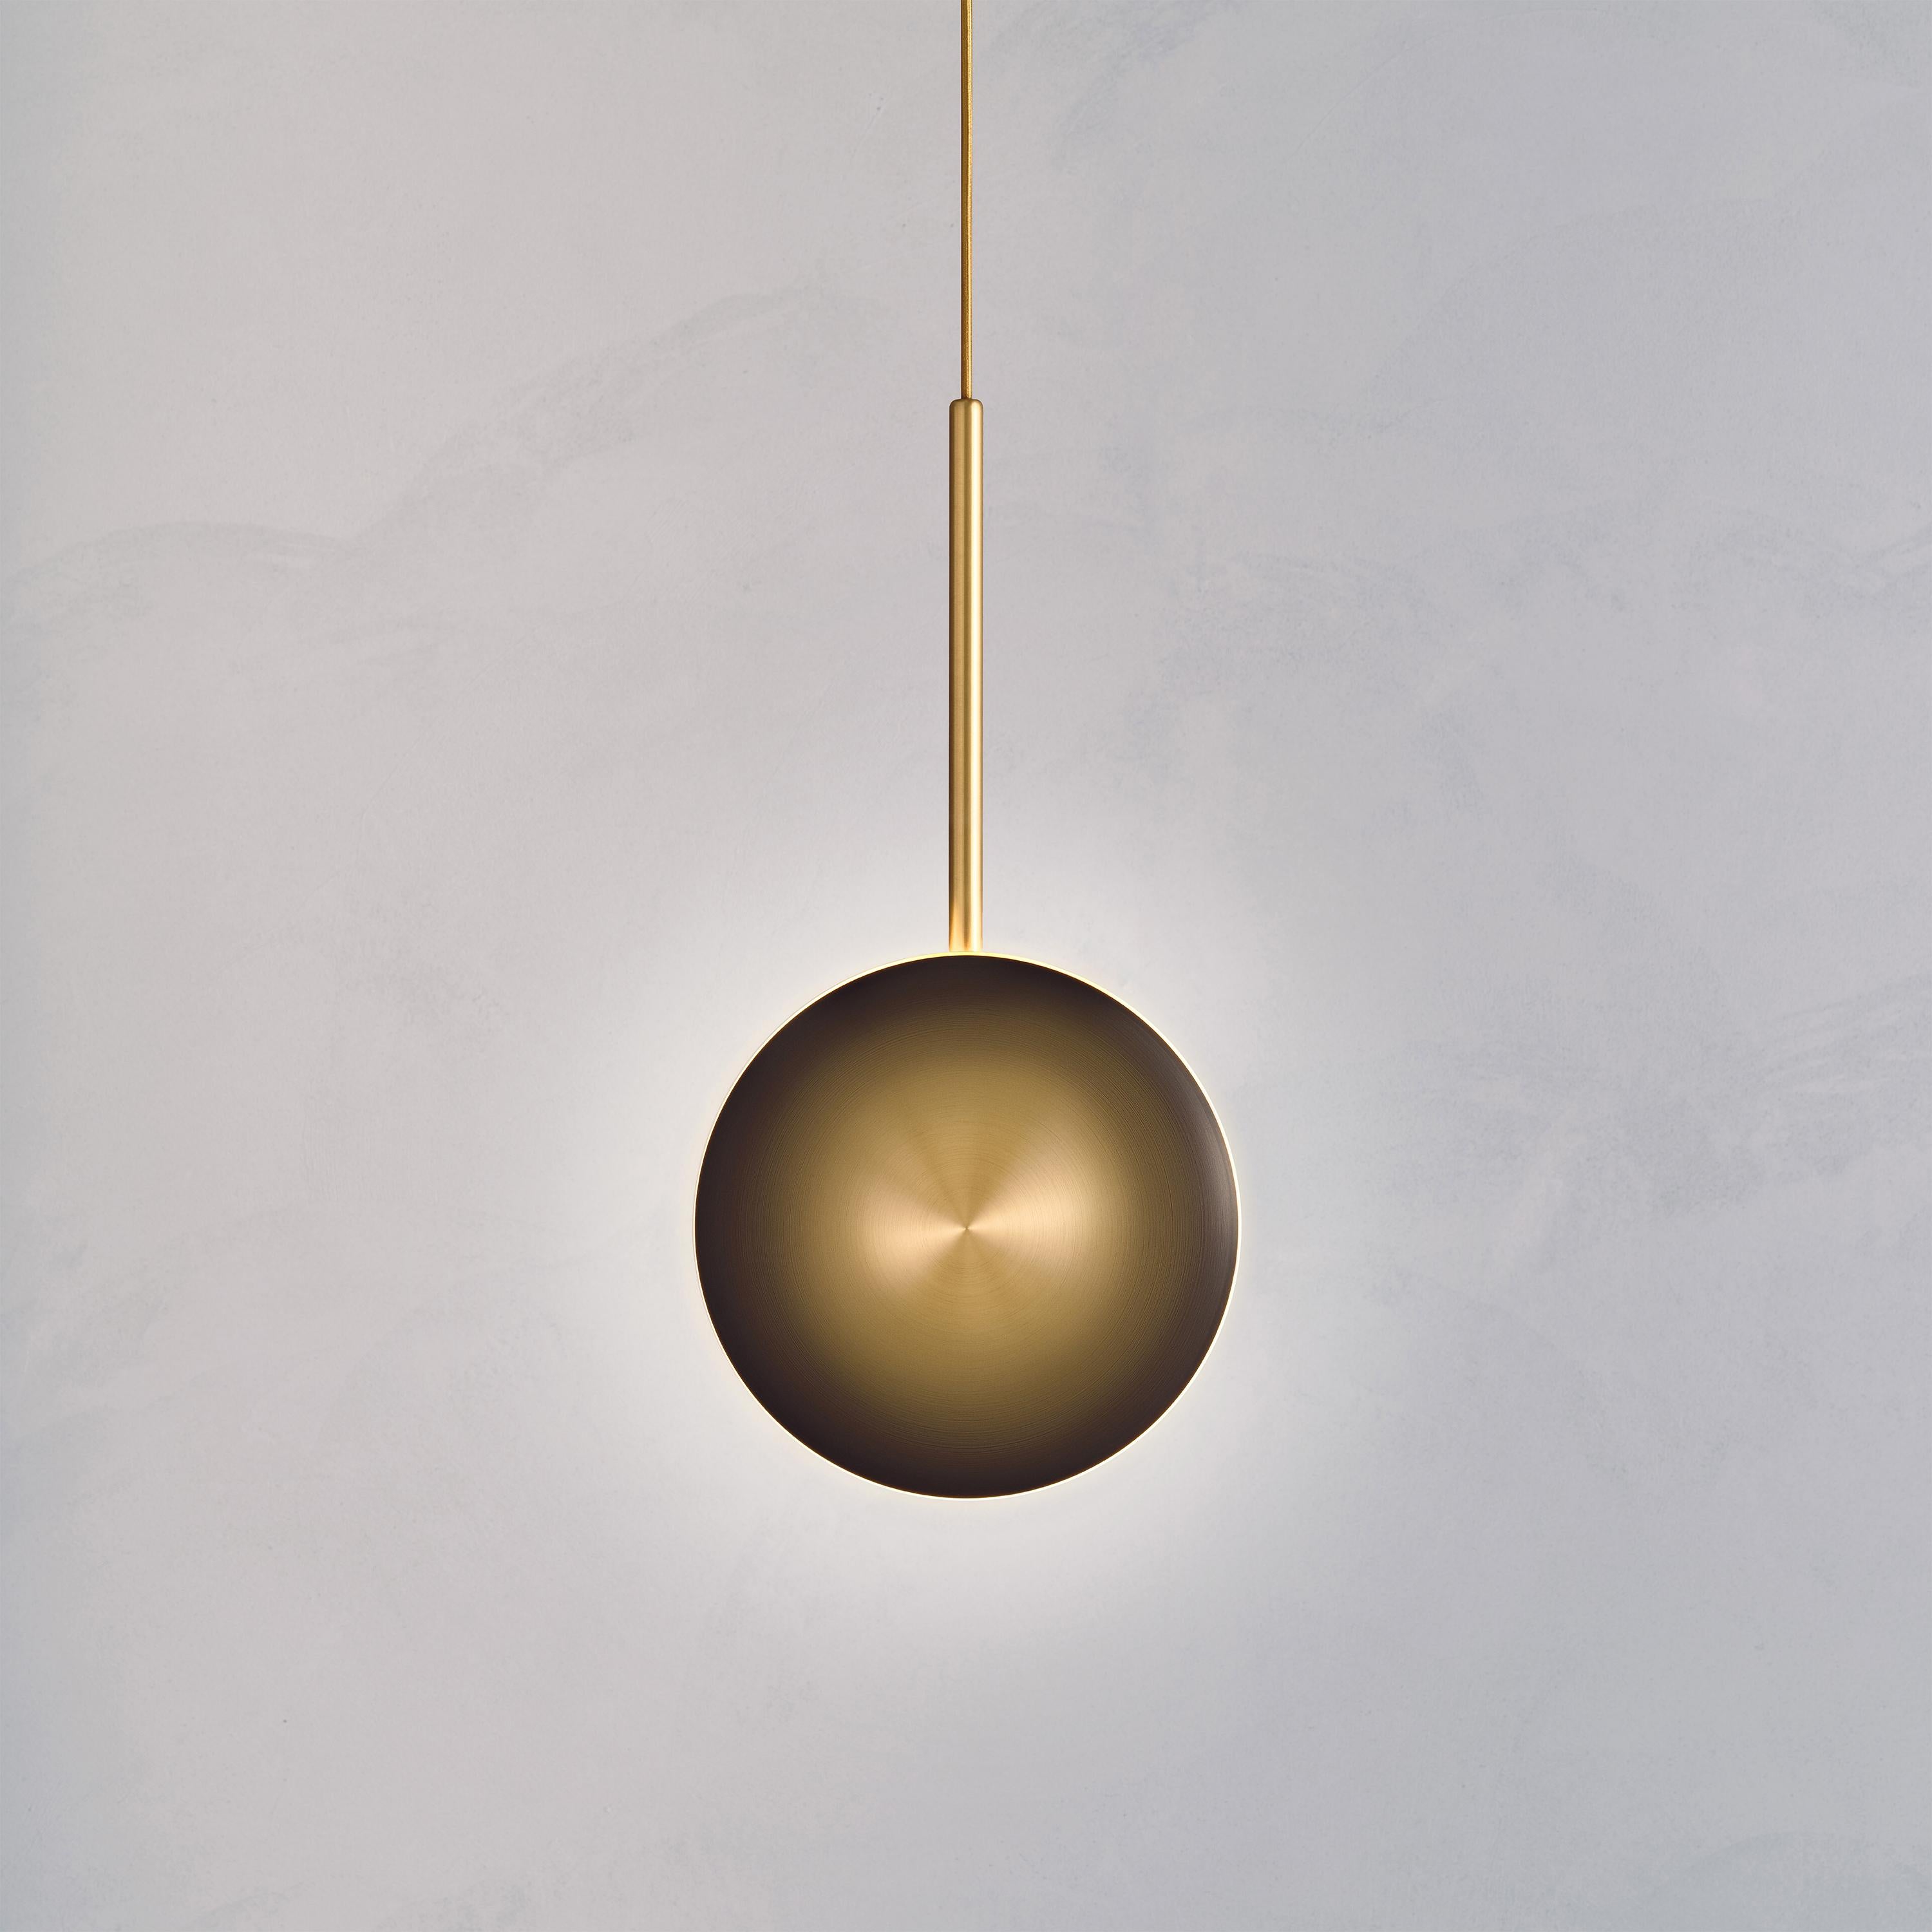 Named after the astronomical object that signals rebirth and new ideas, the ‘Comet’ pieces are achieved with skilful brass shaping and patina finishes that celebrate British metal artisanship.
 
Softly illuminated with integrated LED from within,